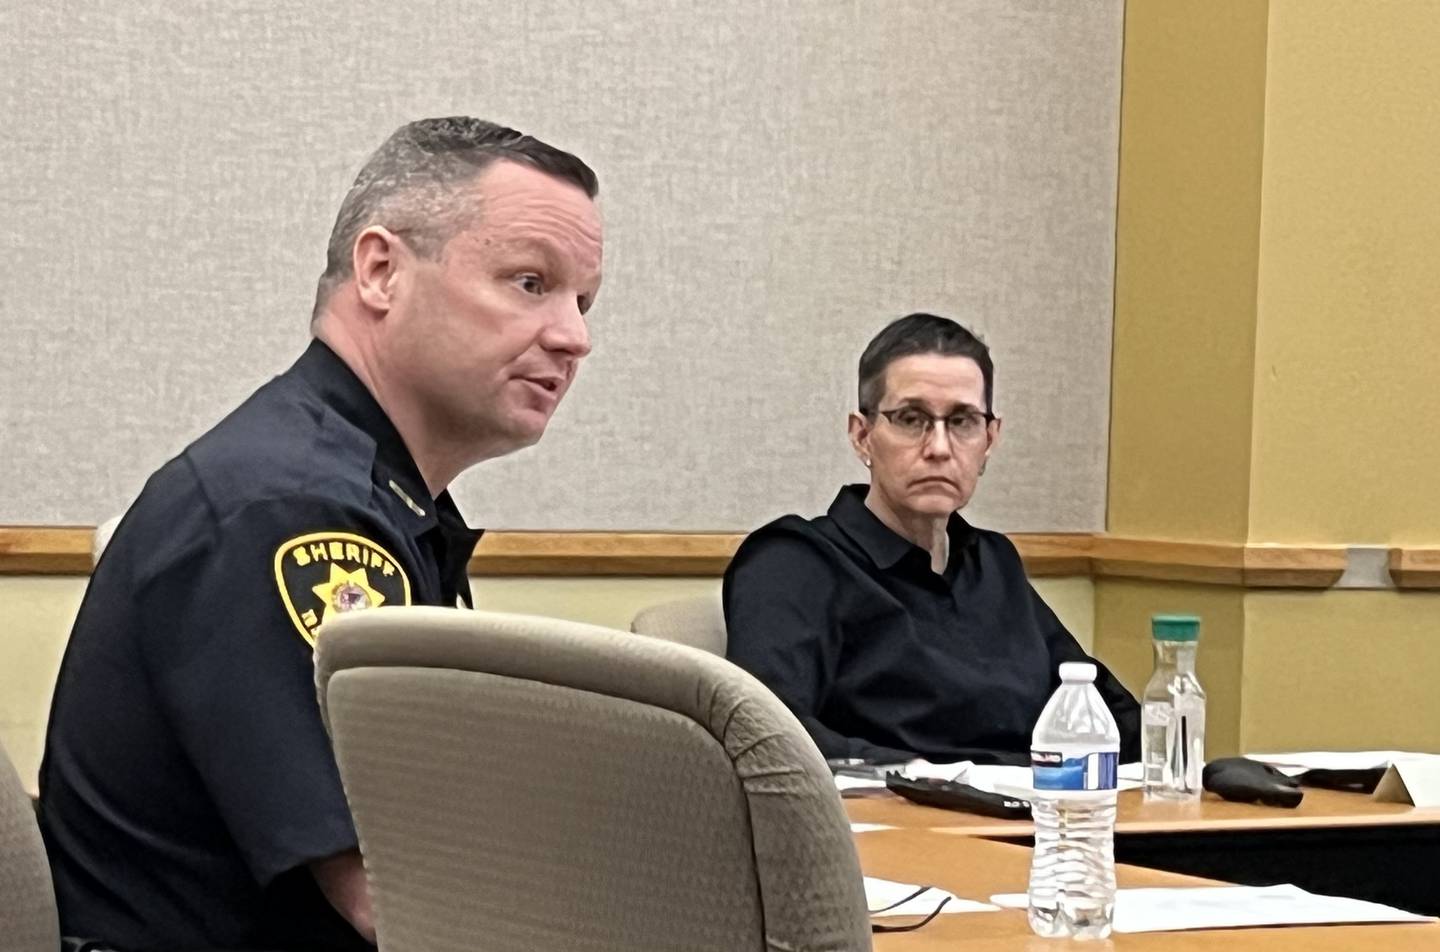 DeKalb County Sheriff Andy Sullivan presents the 2022 DeKalb County Sheriff's Office annual report to the DeKalb County Board's Law and Justice Committee on May 22, 2023.